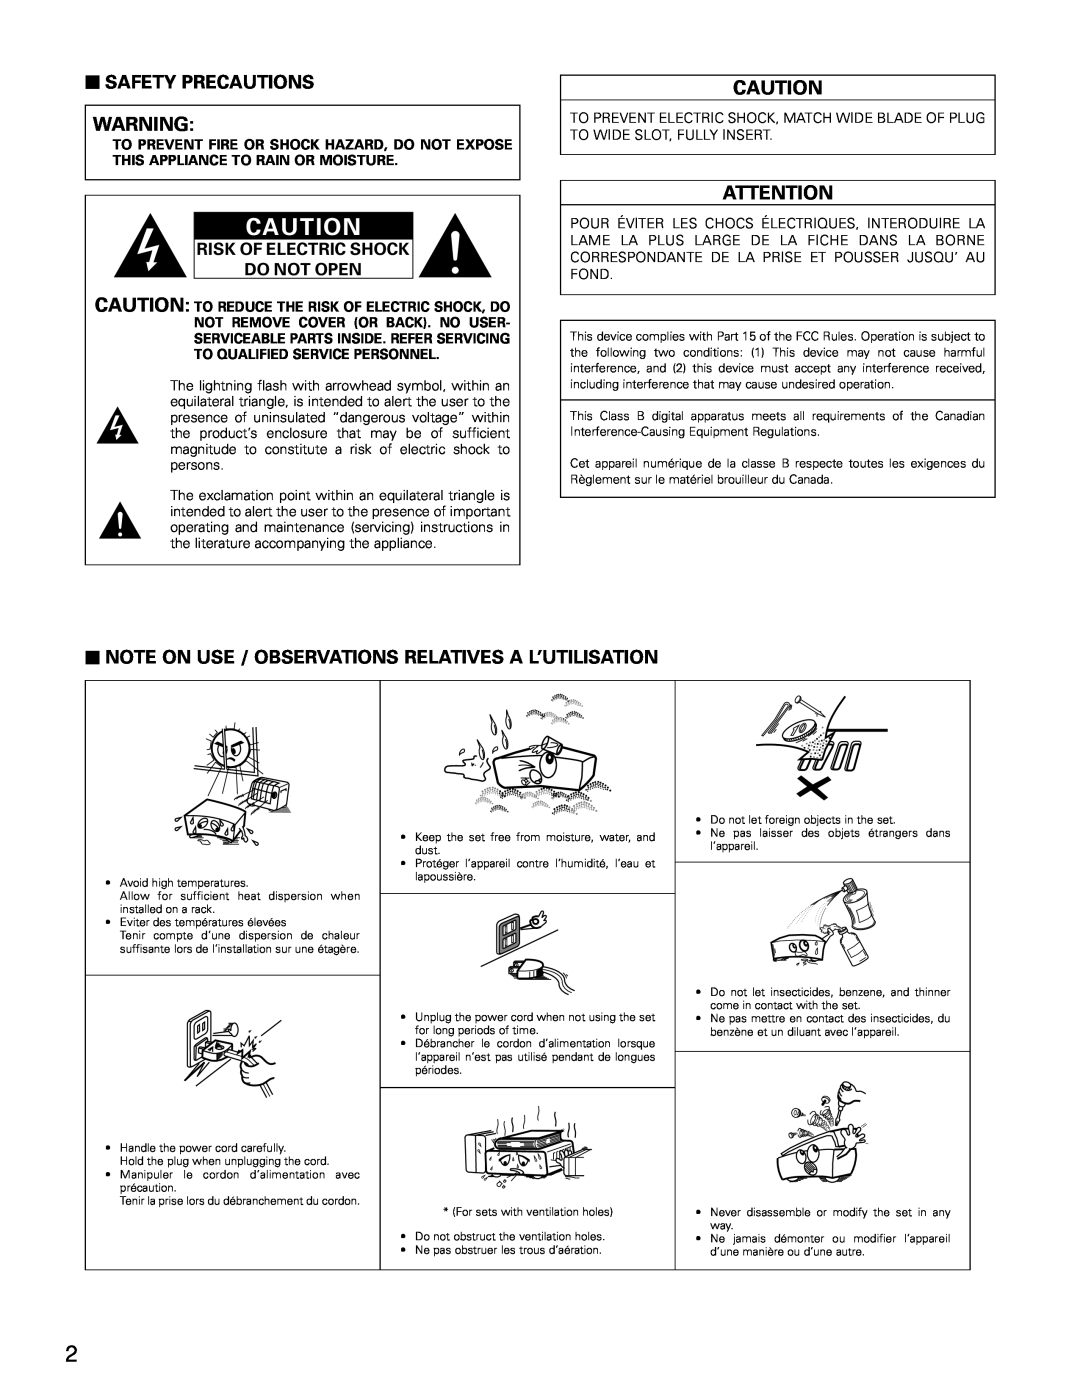 Denon AVR-3802 manual 2SAFETY PRECAUTIONS, Risk Of Electric Shock Do Not Open 